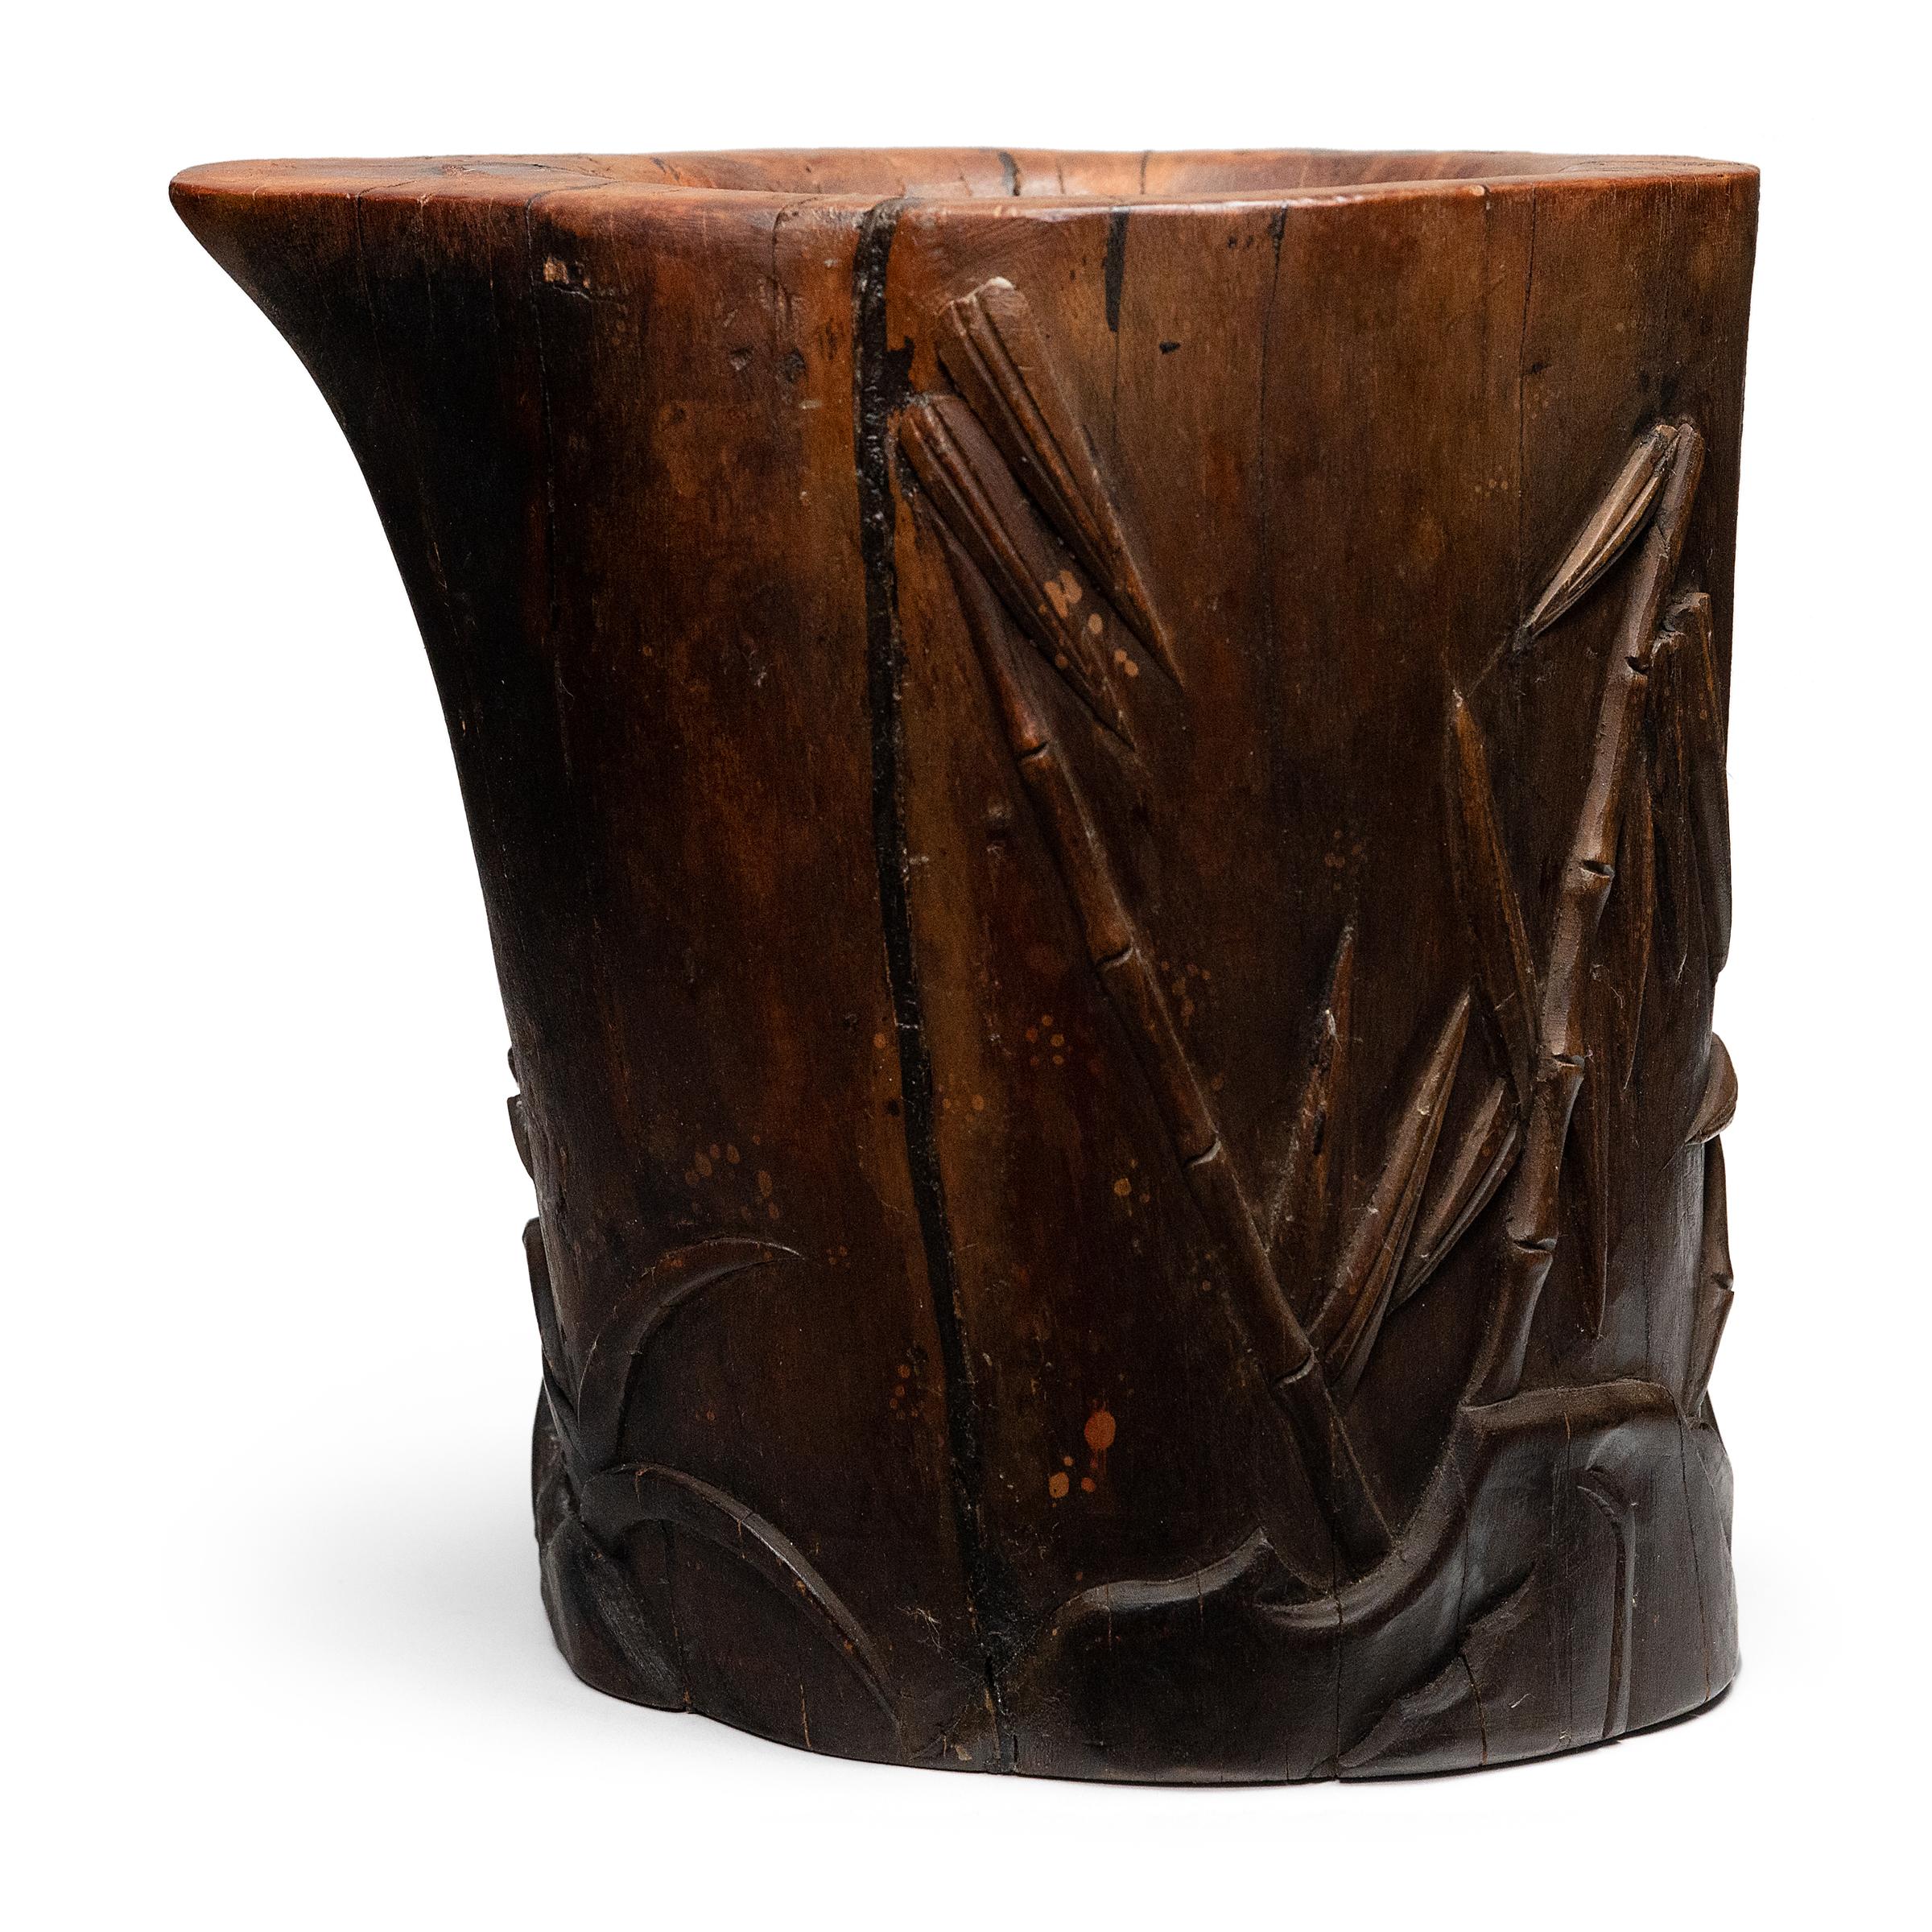 Chinese Export Wooden Chinese Brush Pot with Bamboo Carvings, c. 1900